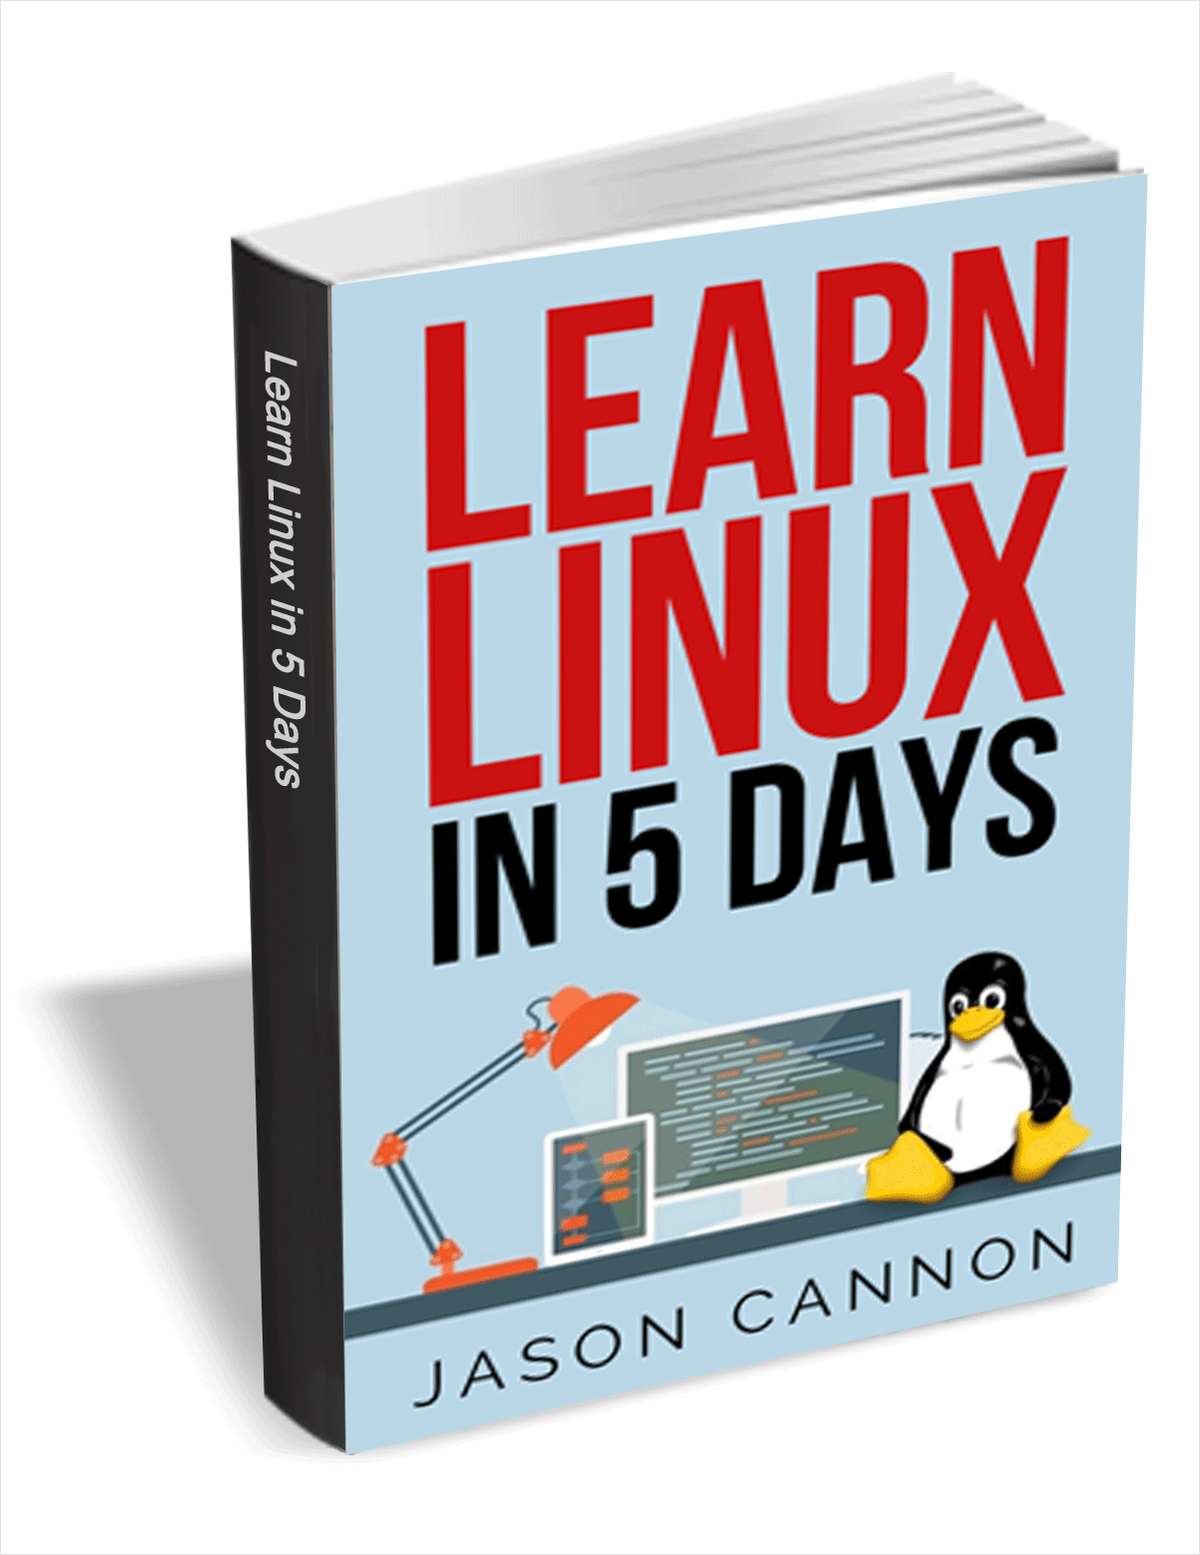 Learn Linux in 5 Days